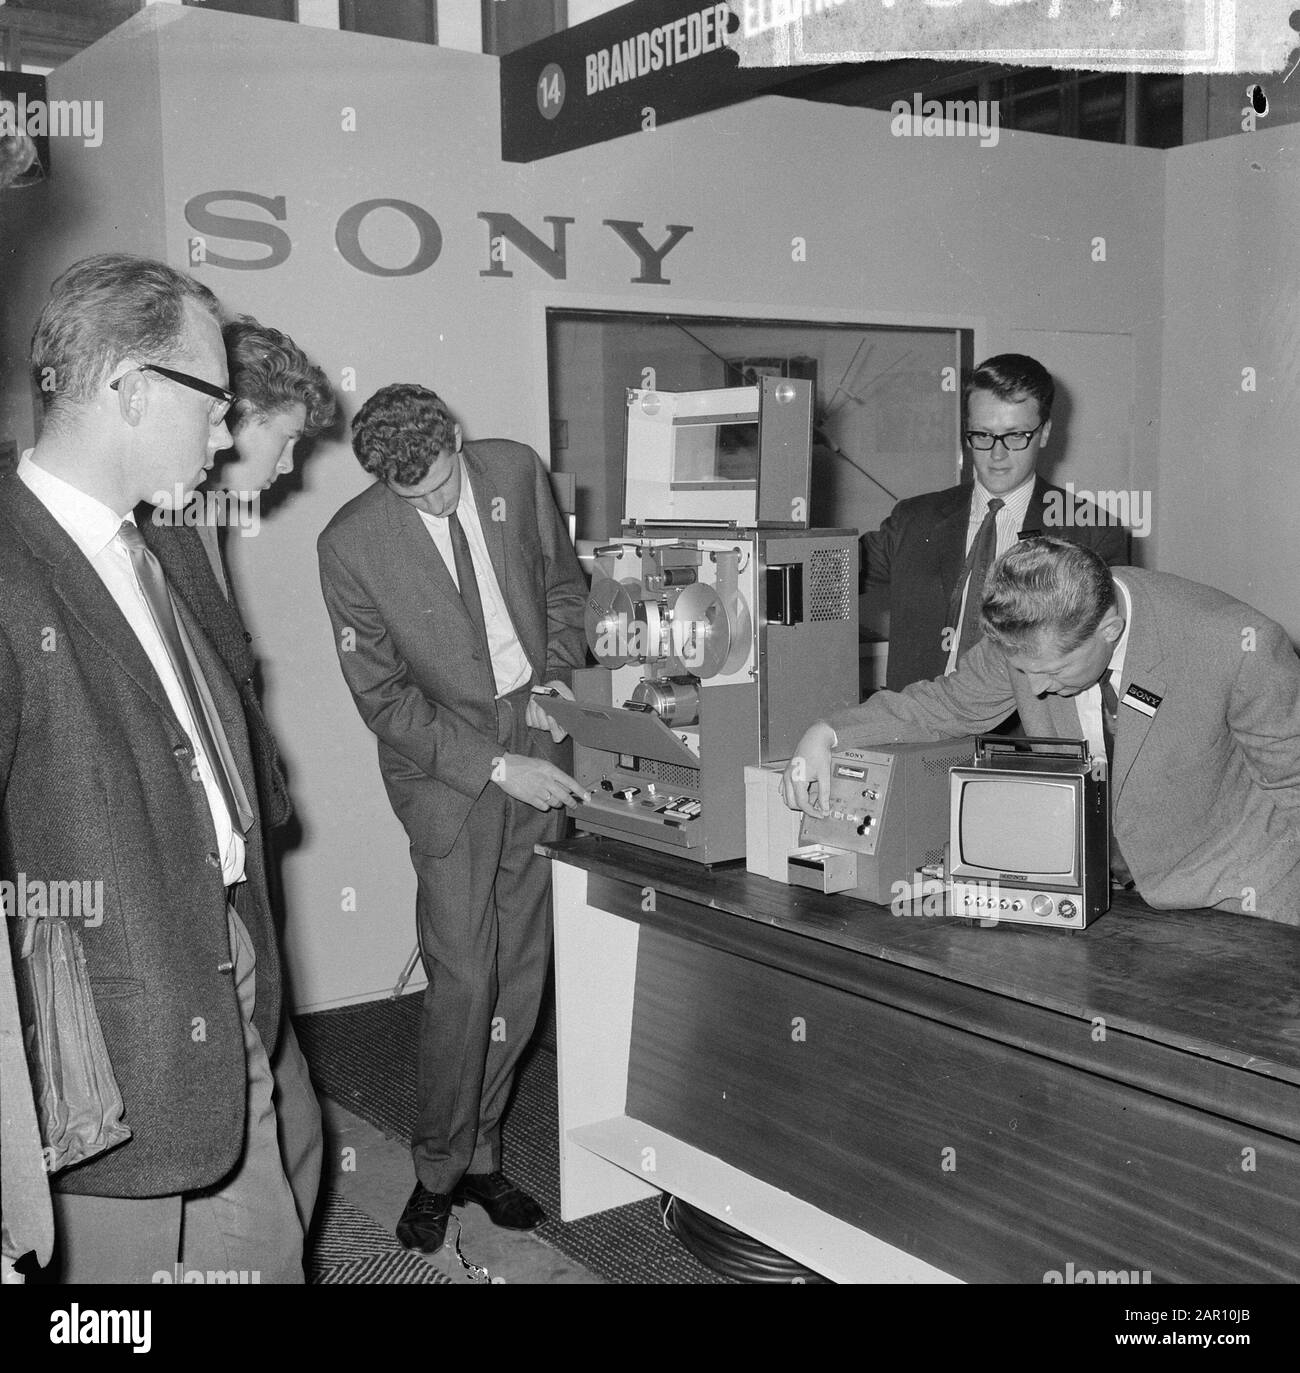 Fiarex 1964 at the RAI in Amsterdam, at the stand of Sony was a lot of